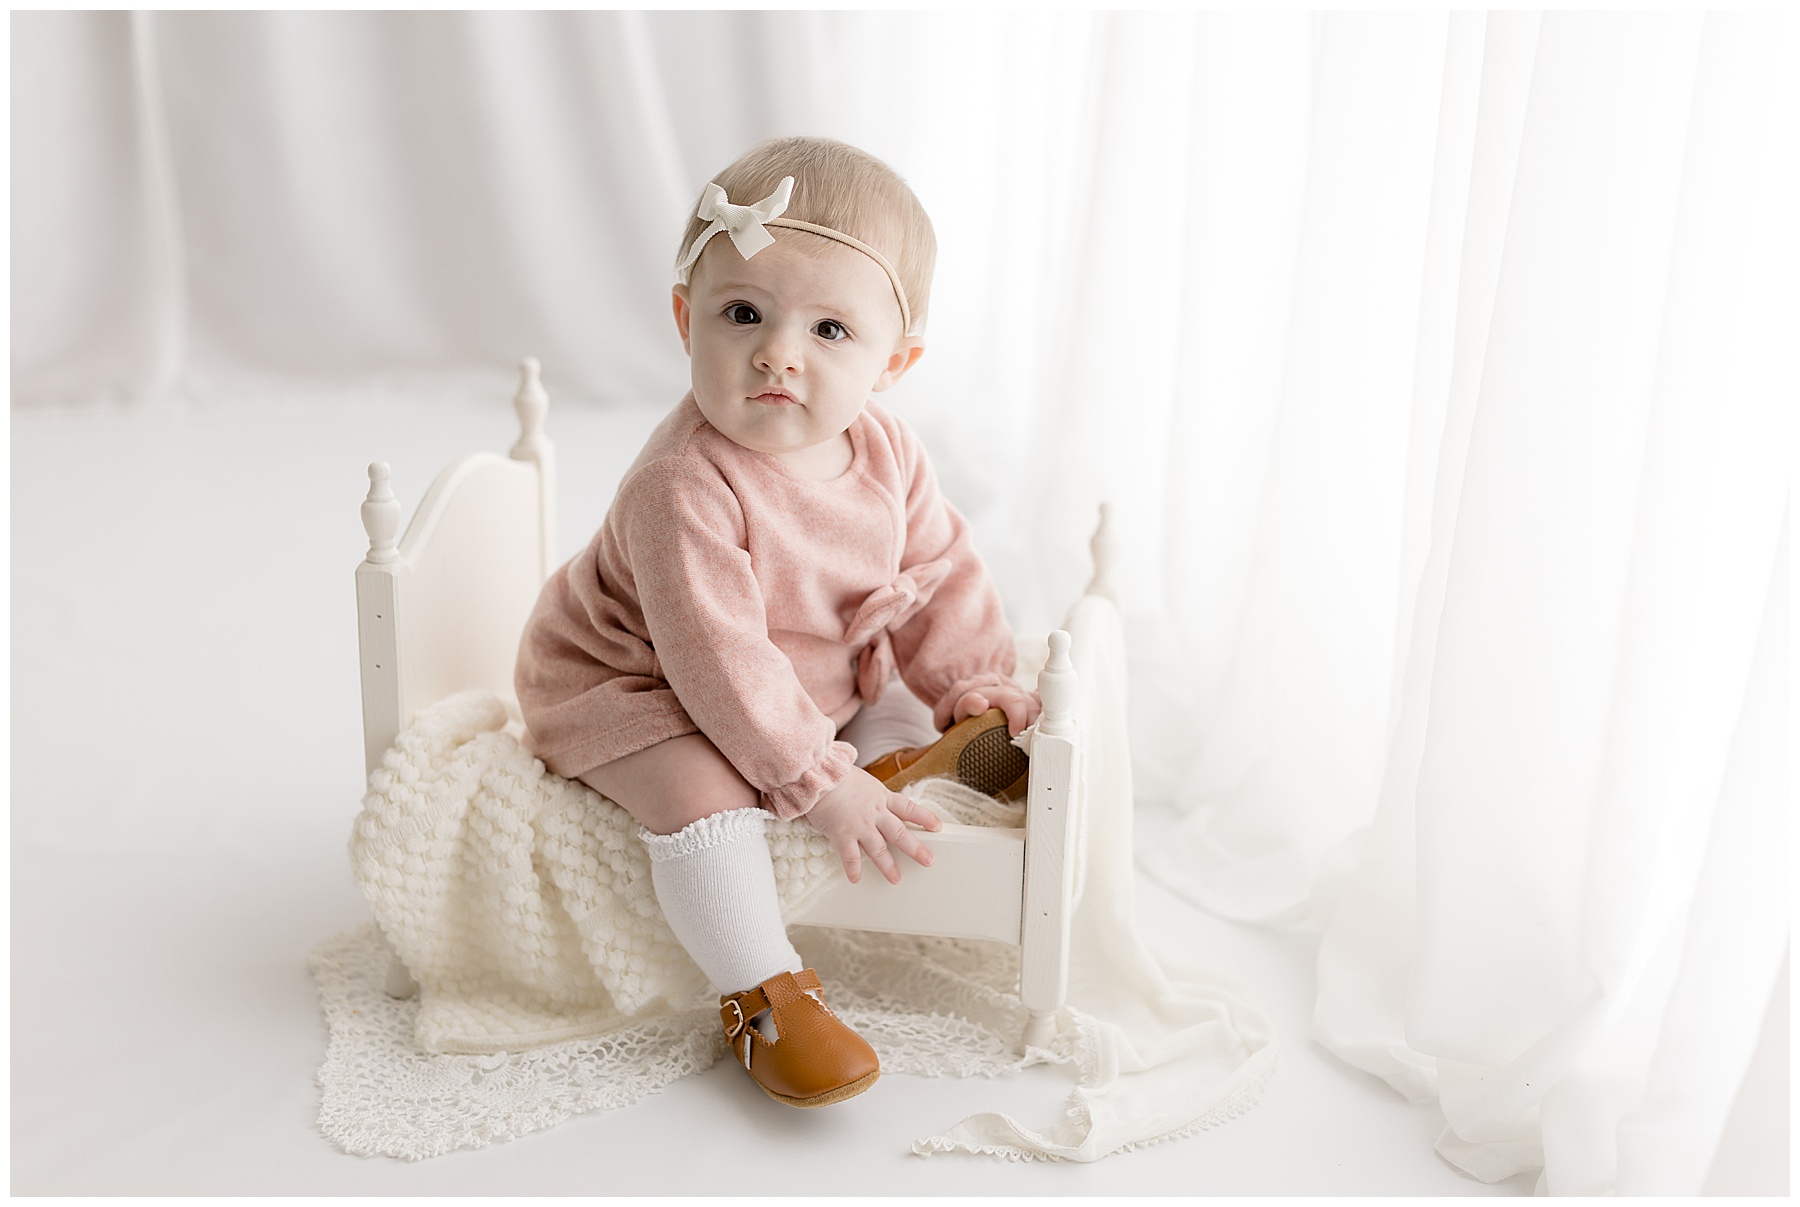 A dainty baby girl in pink dress, knee socks, and brown leather shoes sits on a white wooden bed prop in front of a window with sheer white curtains.